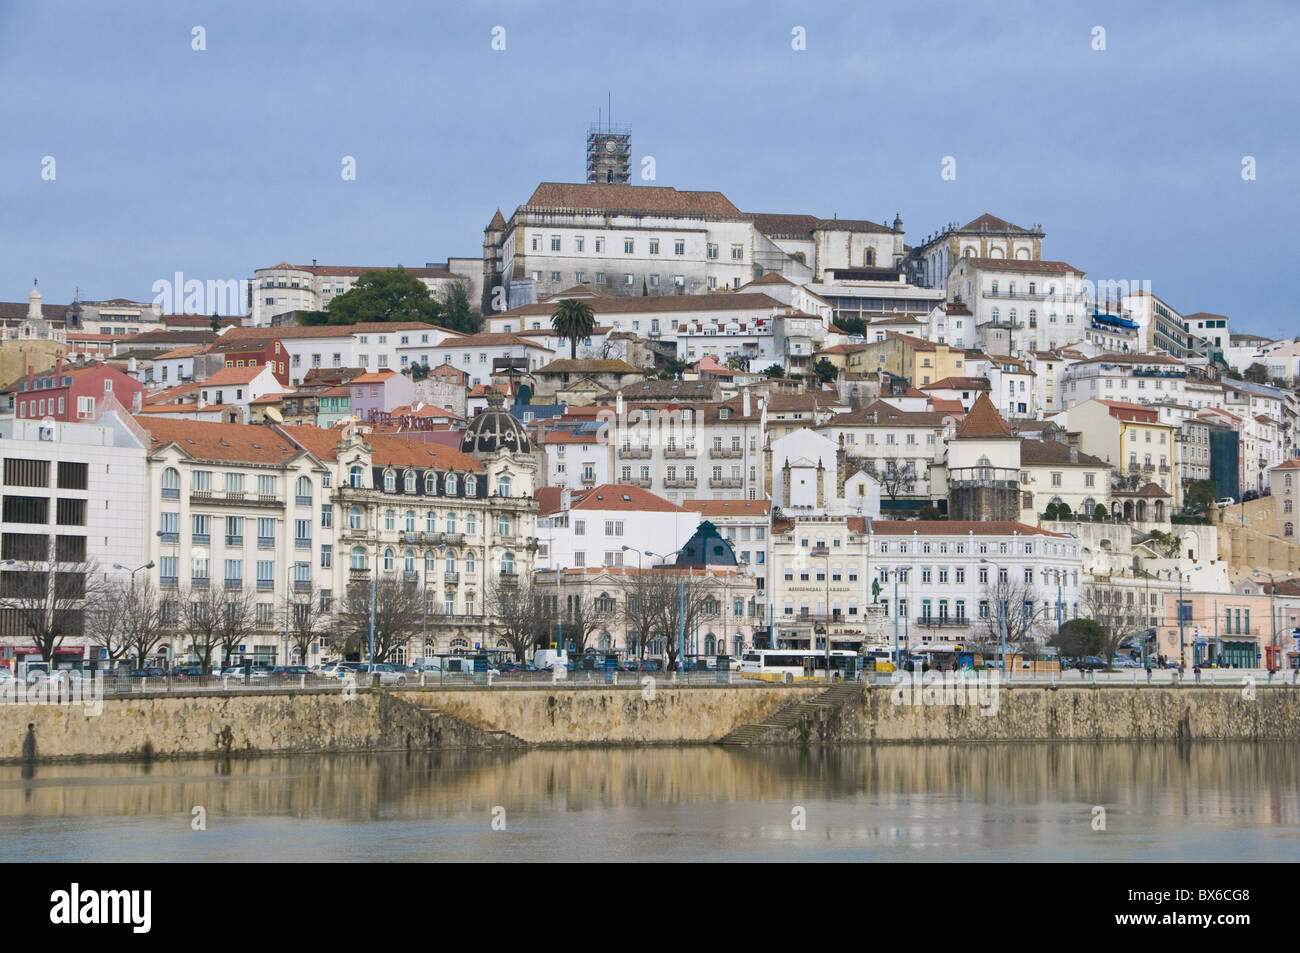 The university town of Coimbra, Portugal, Europe Stock Photo